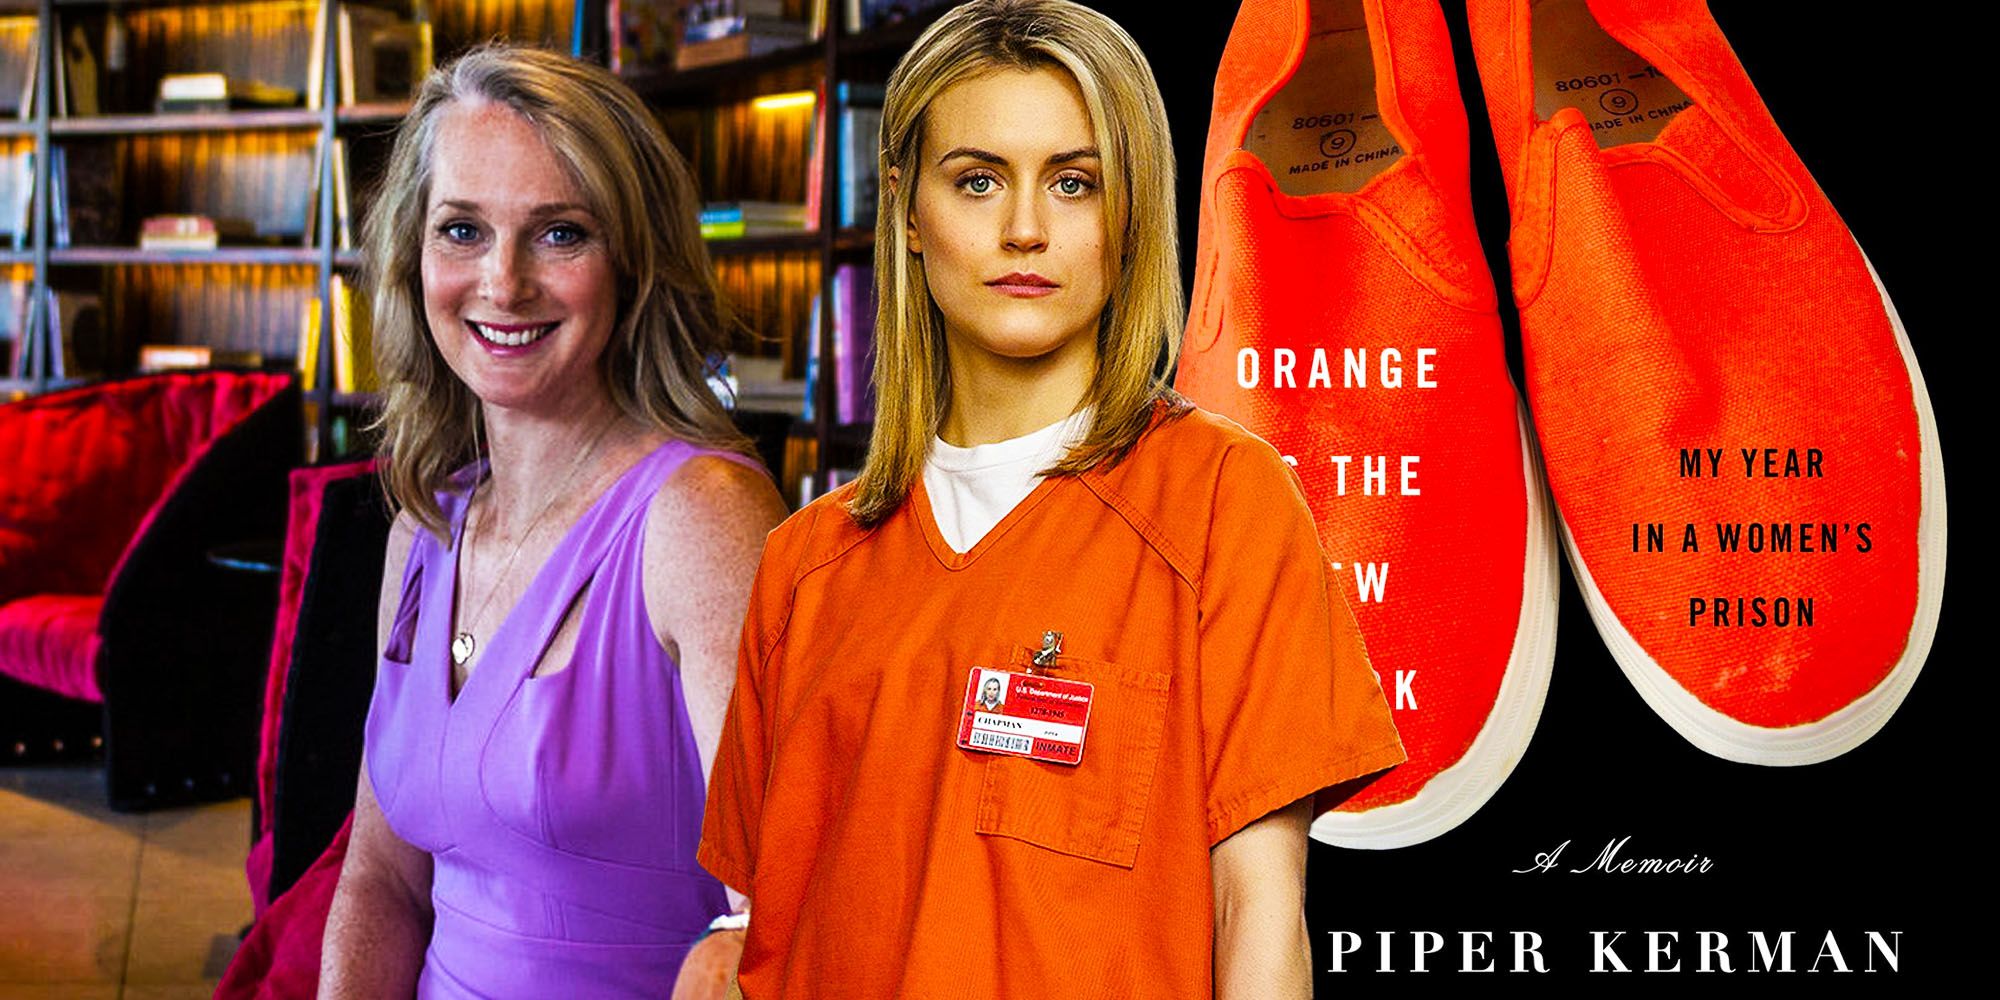 A blended image features Piper Kerman, Taylo Schilling as Piper Chapman, and the cover of Piper Kerman's book